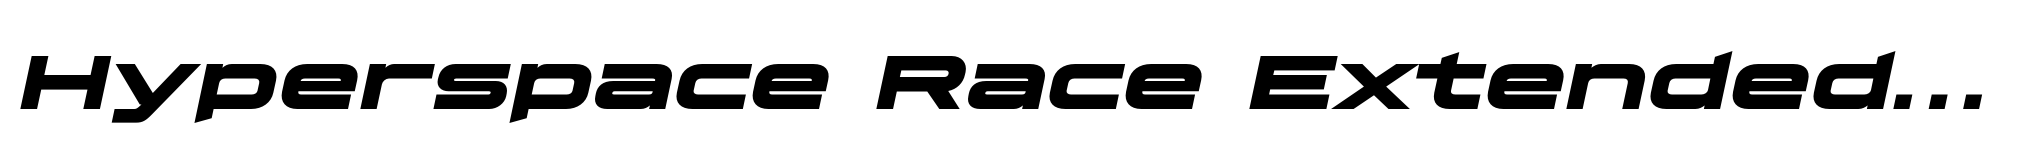 Hyperspace Race Extended Heavy Italic image